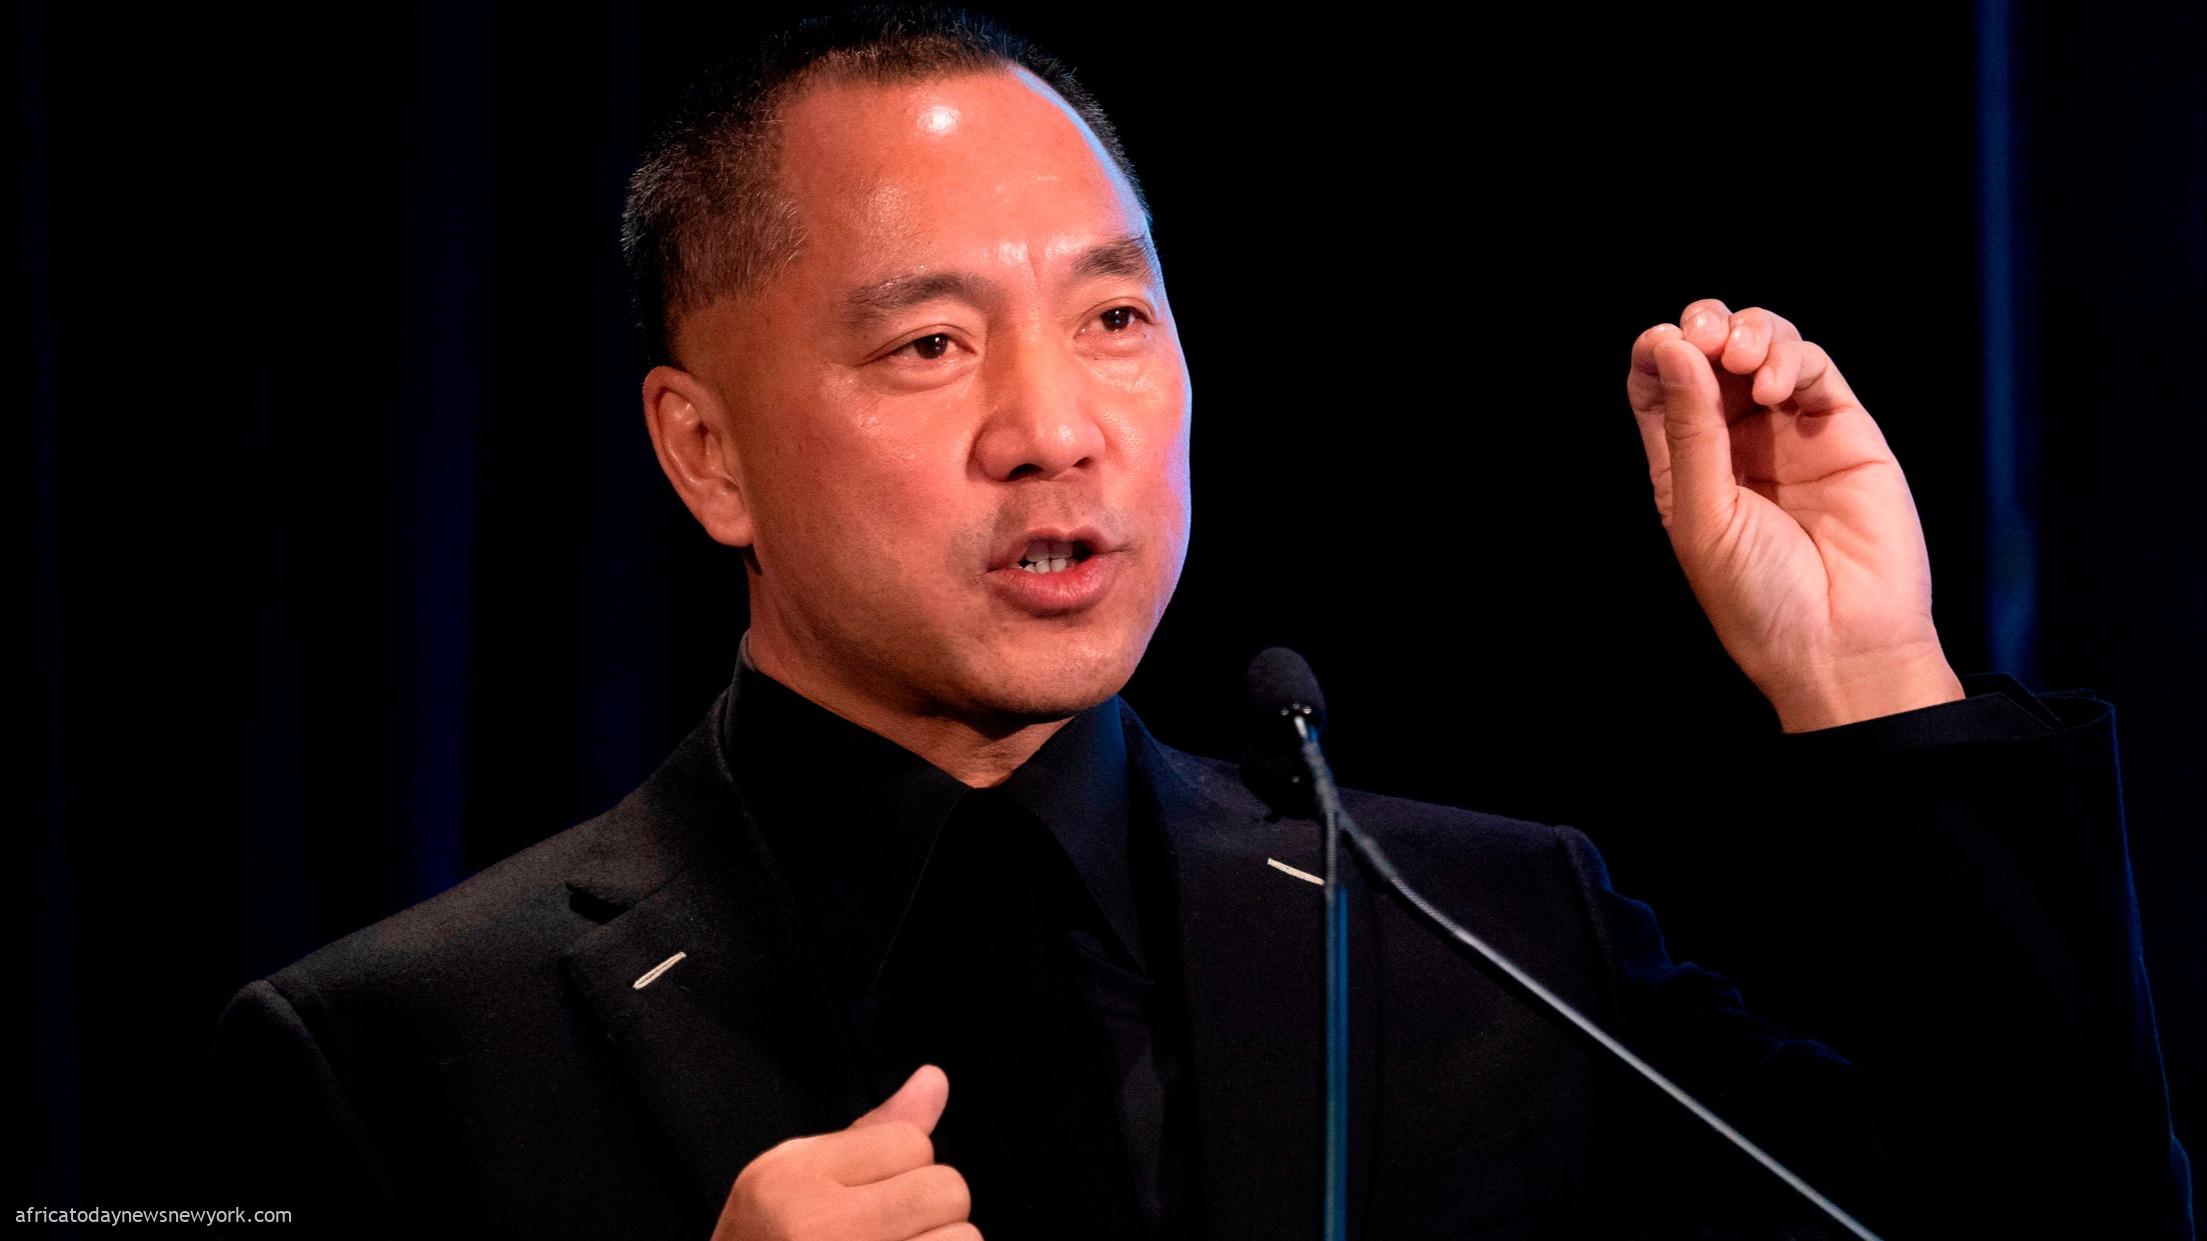 Chinese Tycoon, Guo Wengui Charged With $1bn Fraud